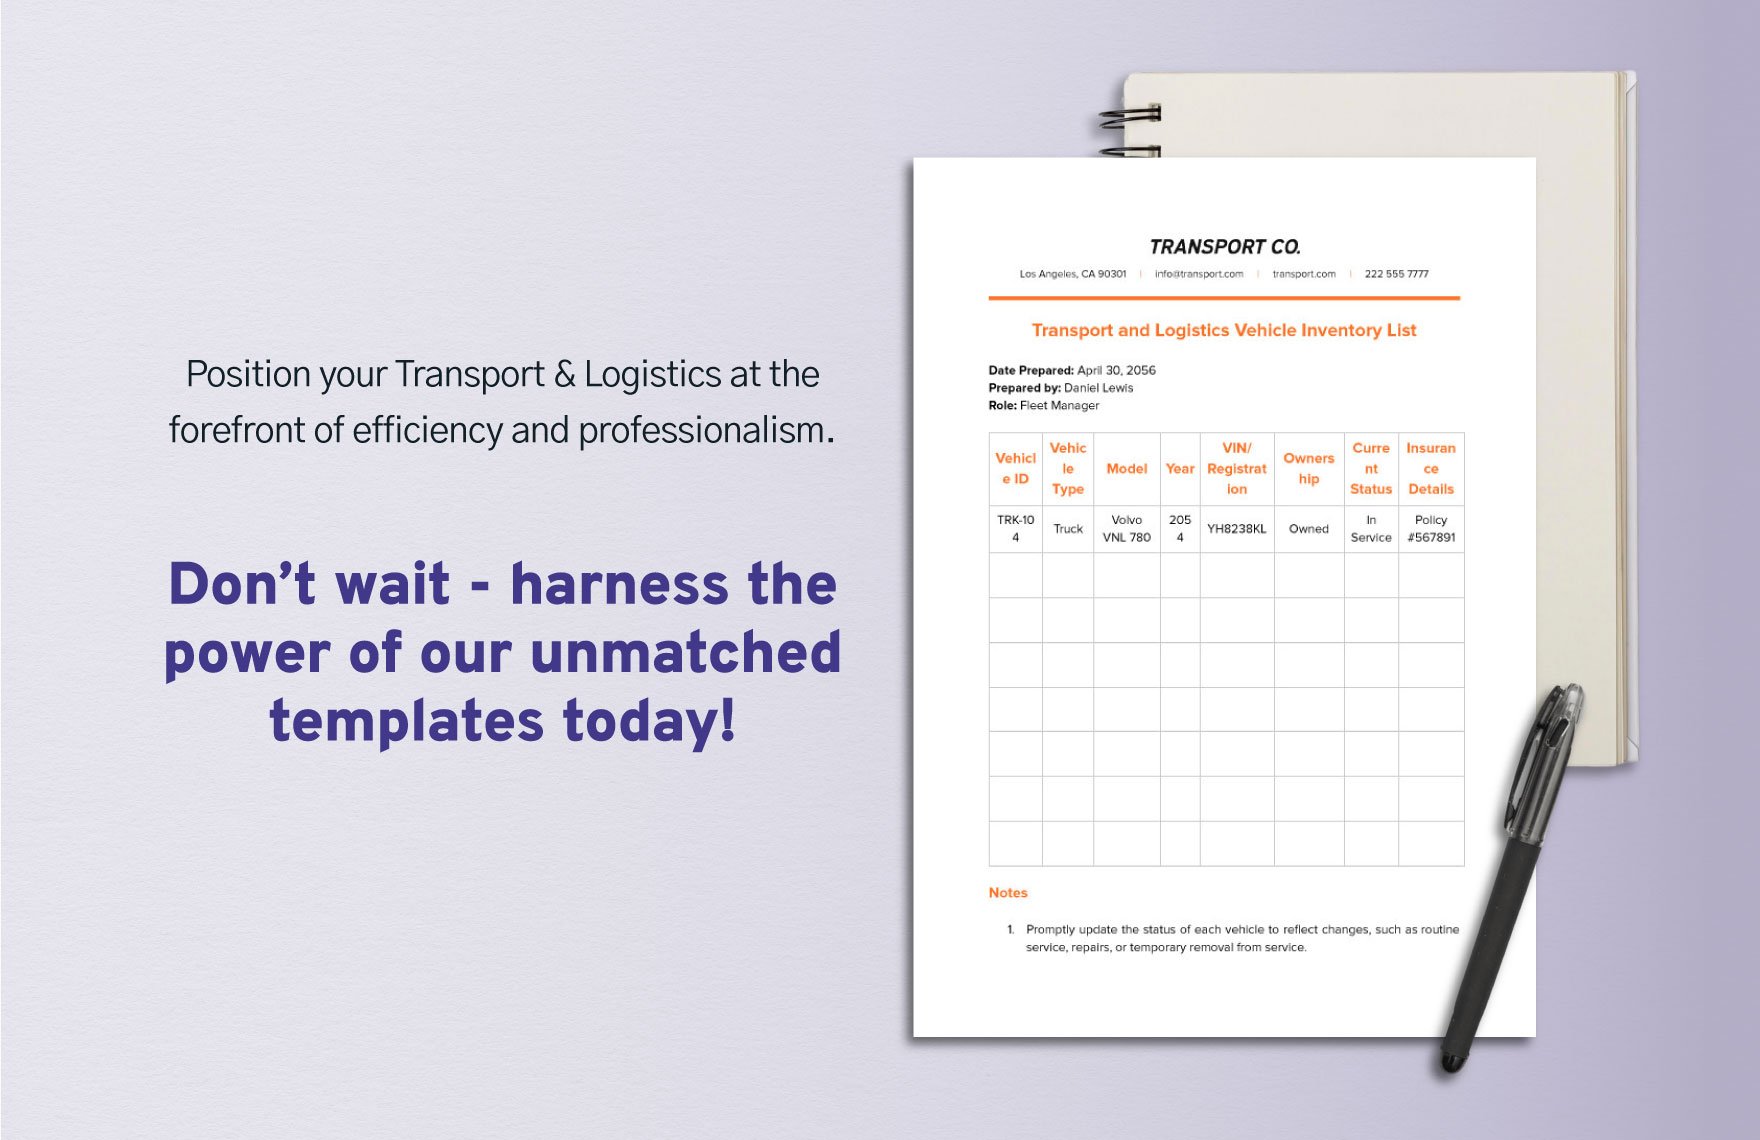 Transport and Logistics Vehicle Inventory List Template